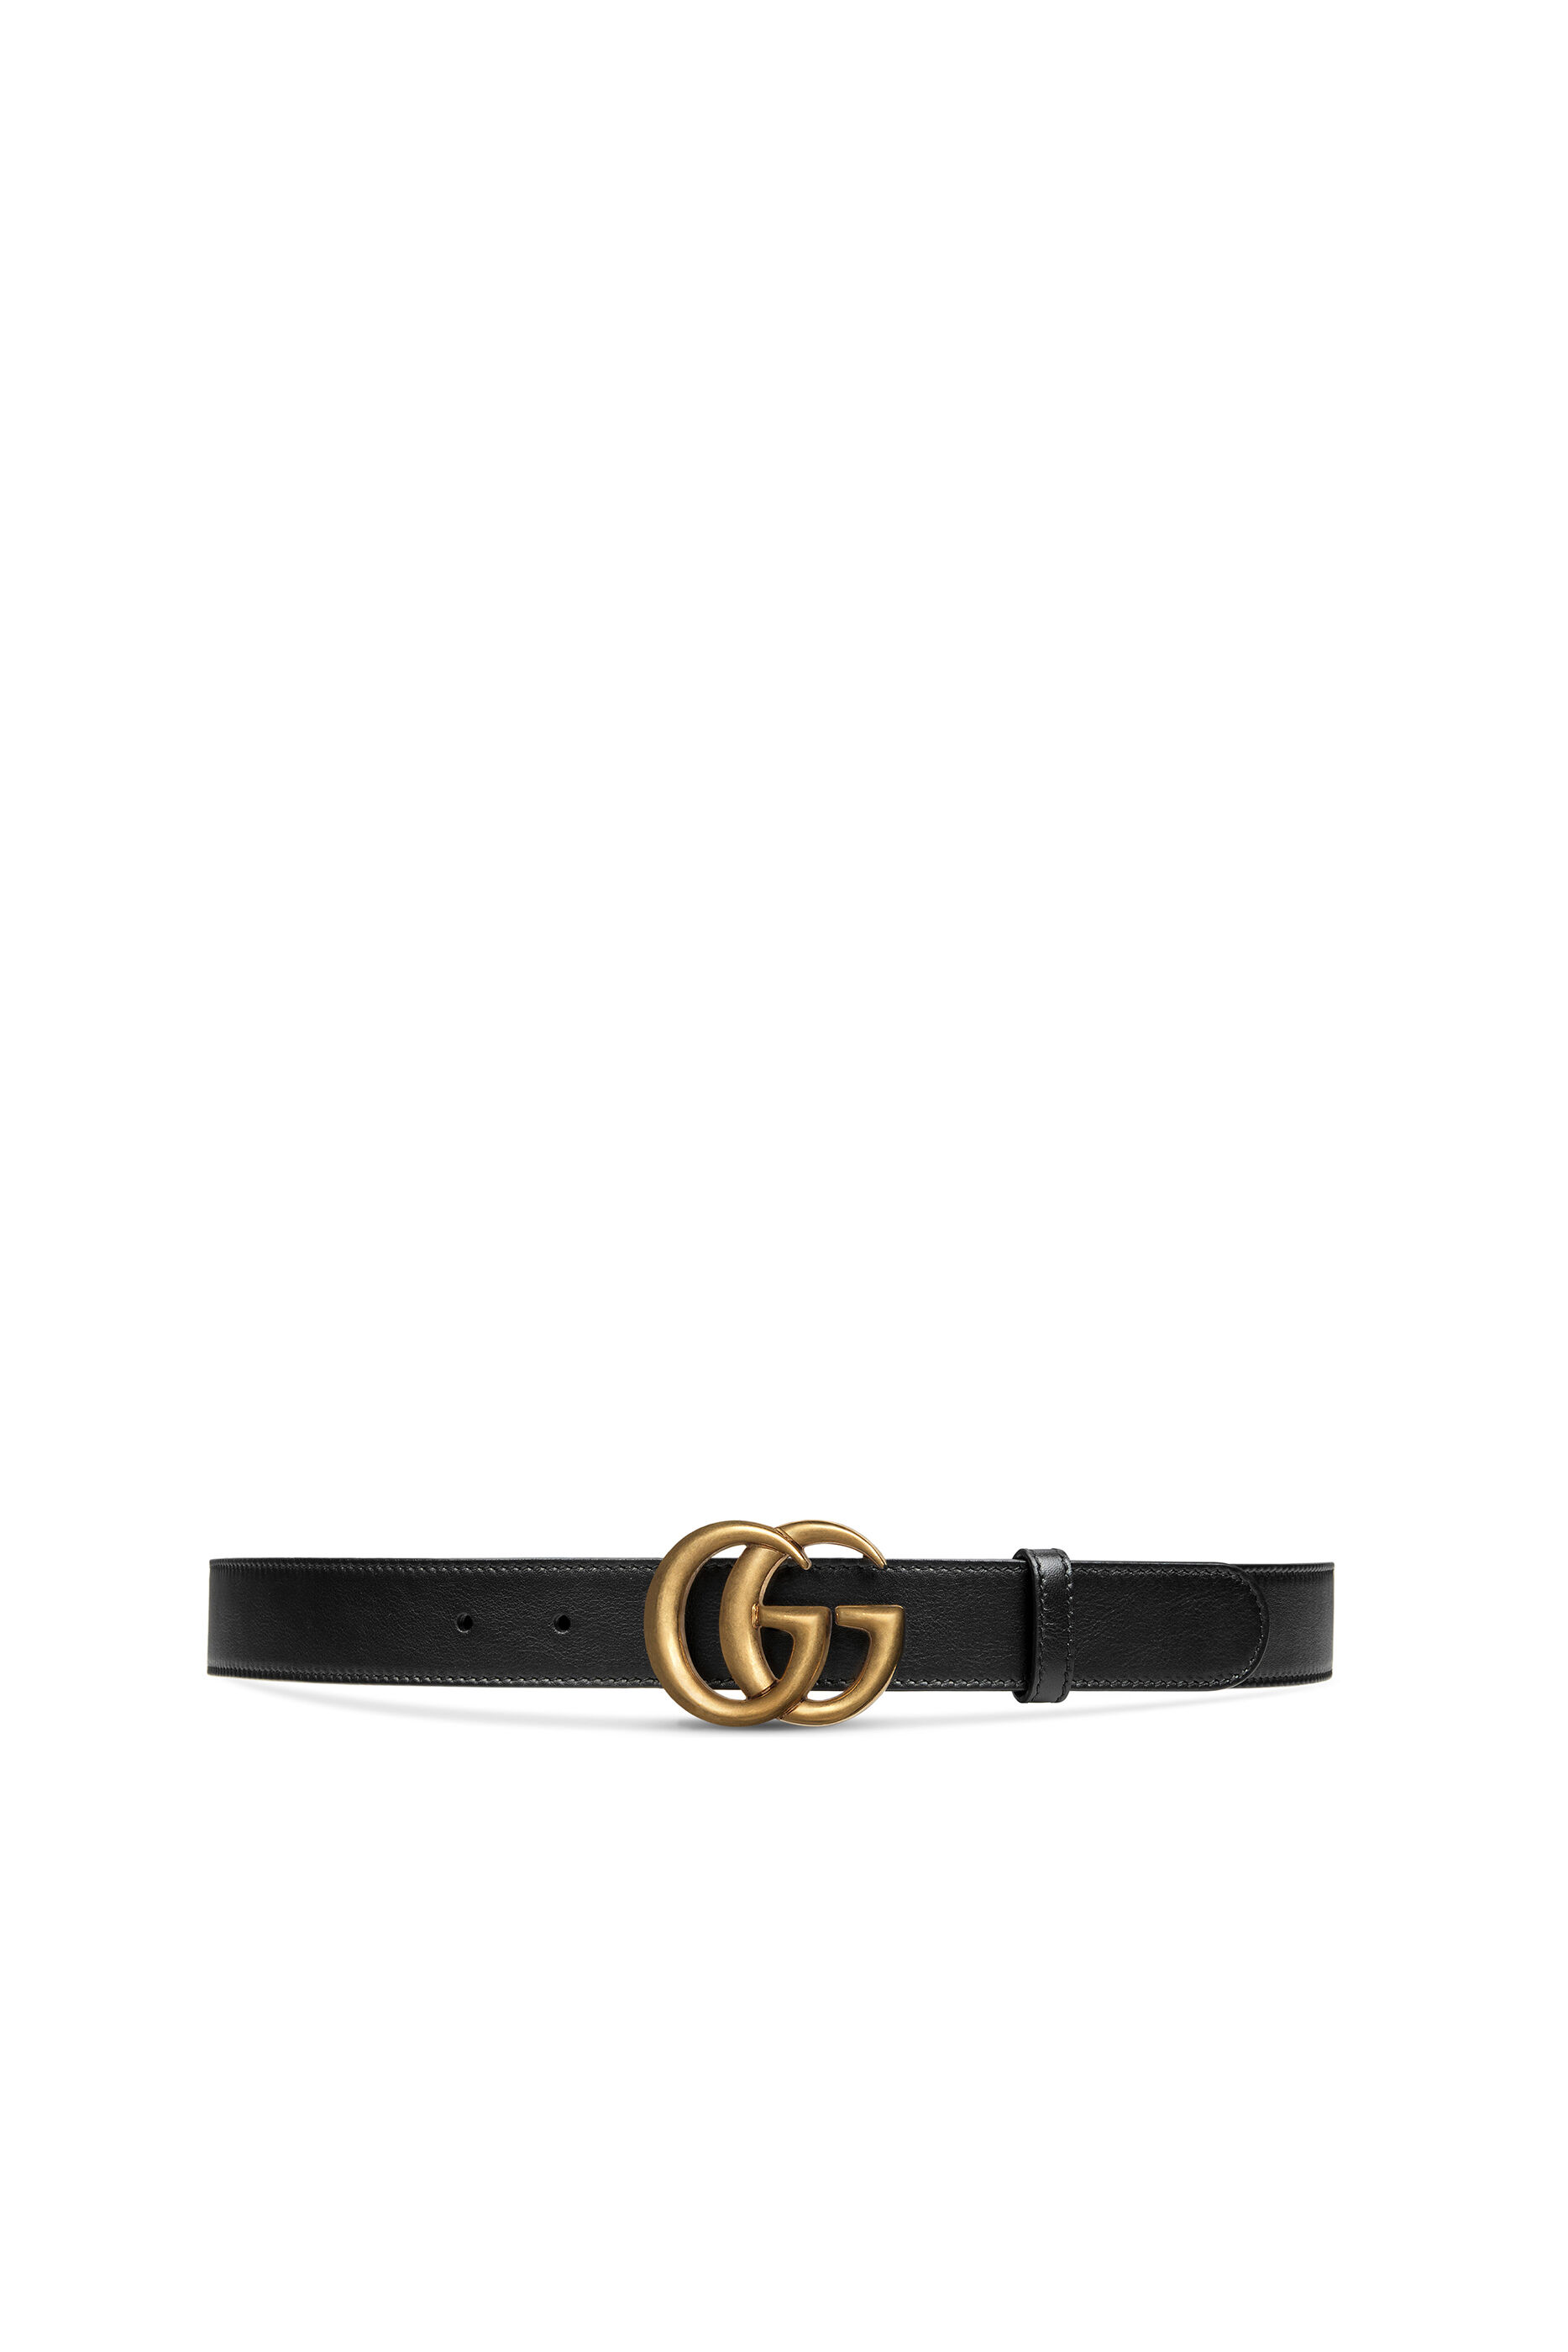 gucci double g belt price